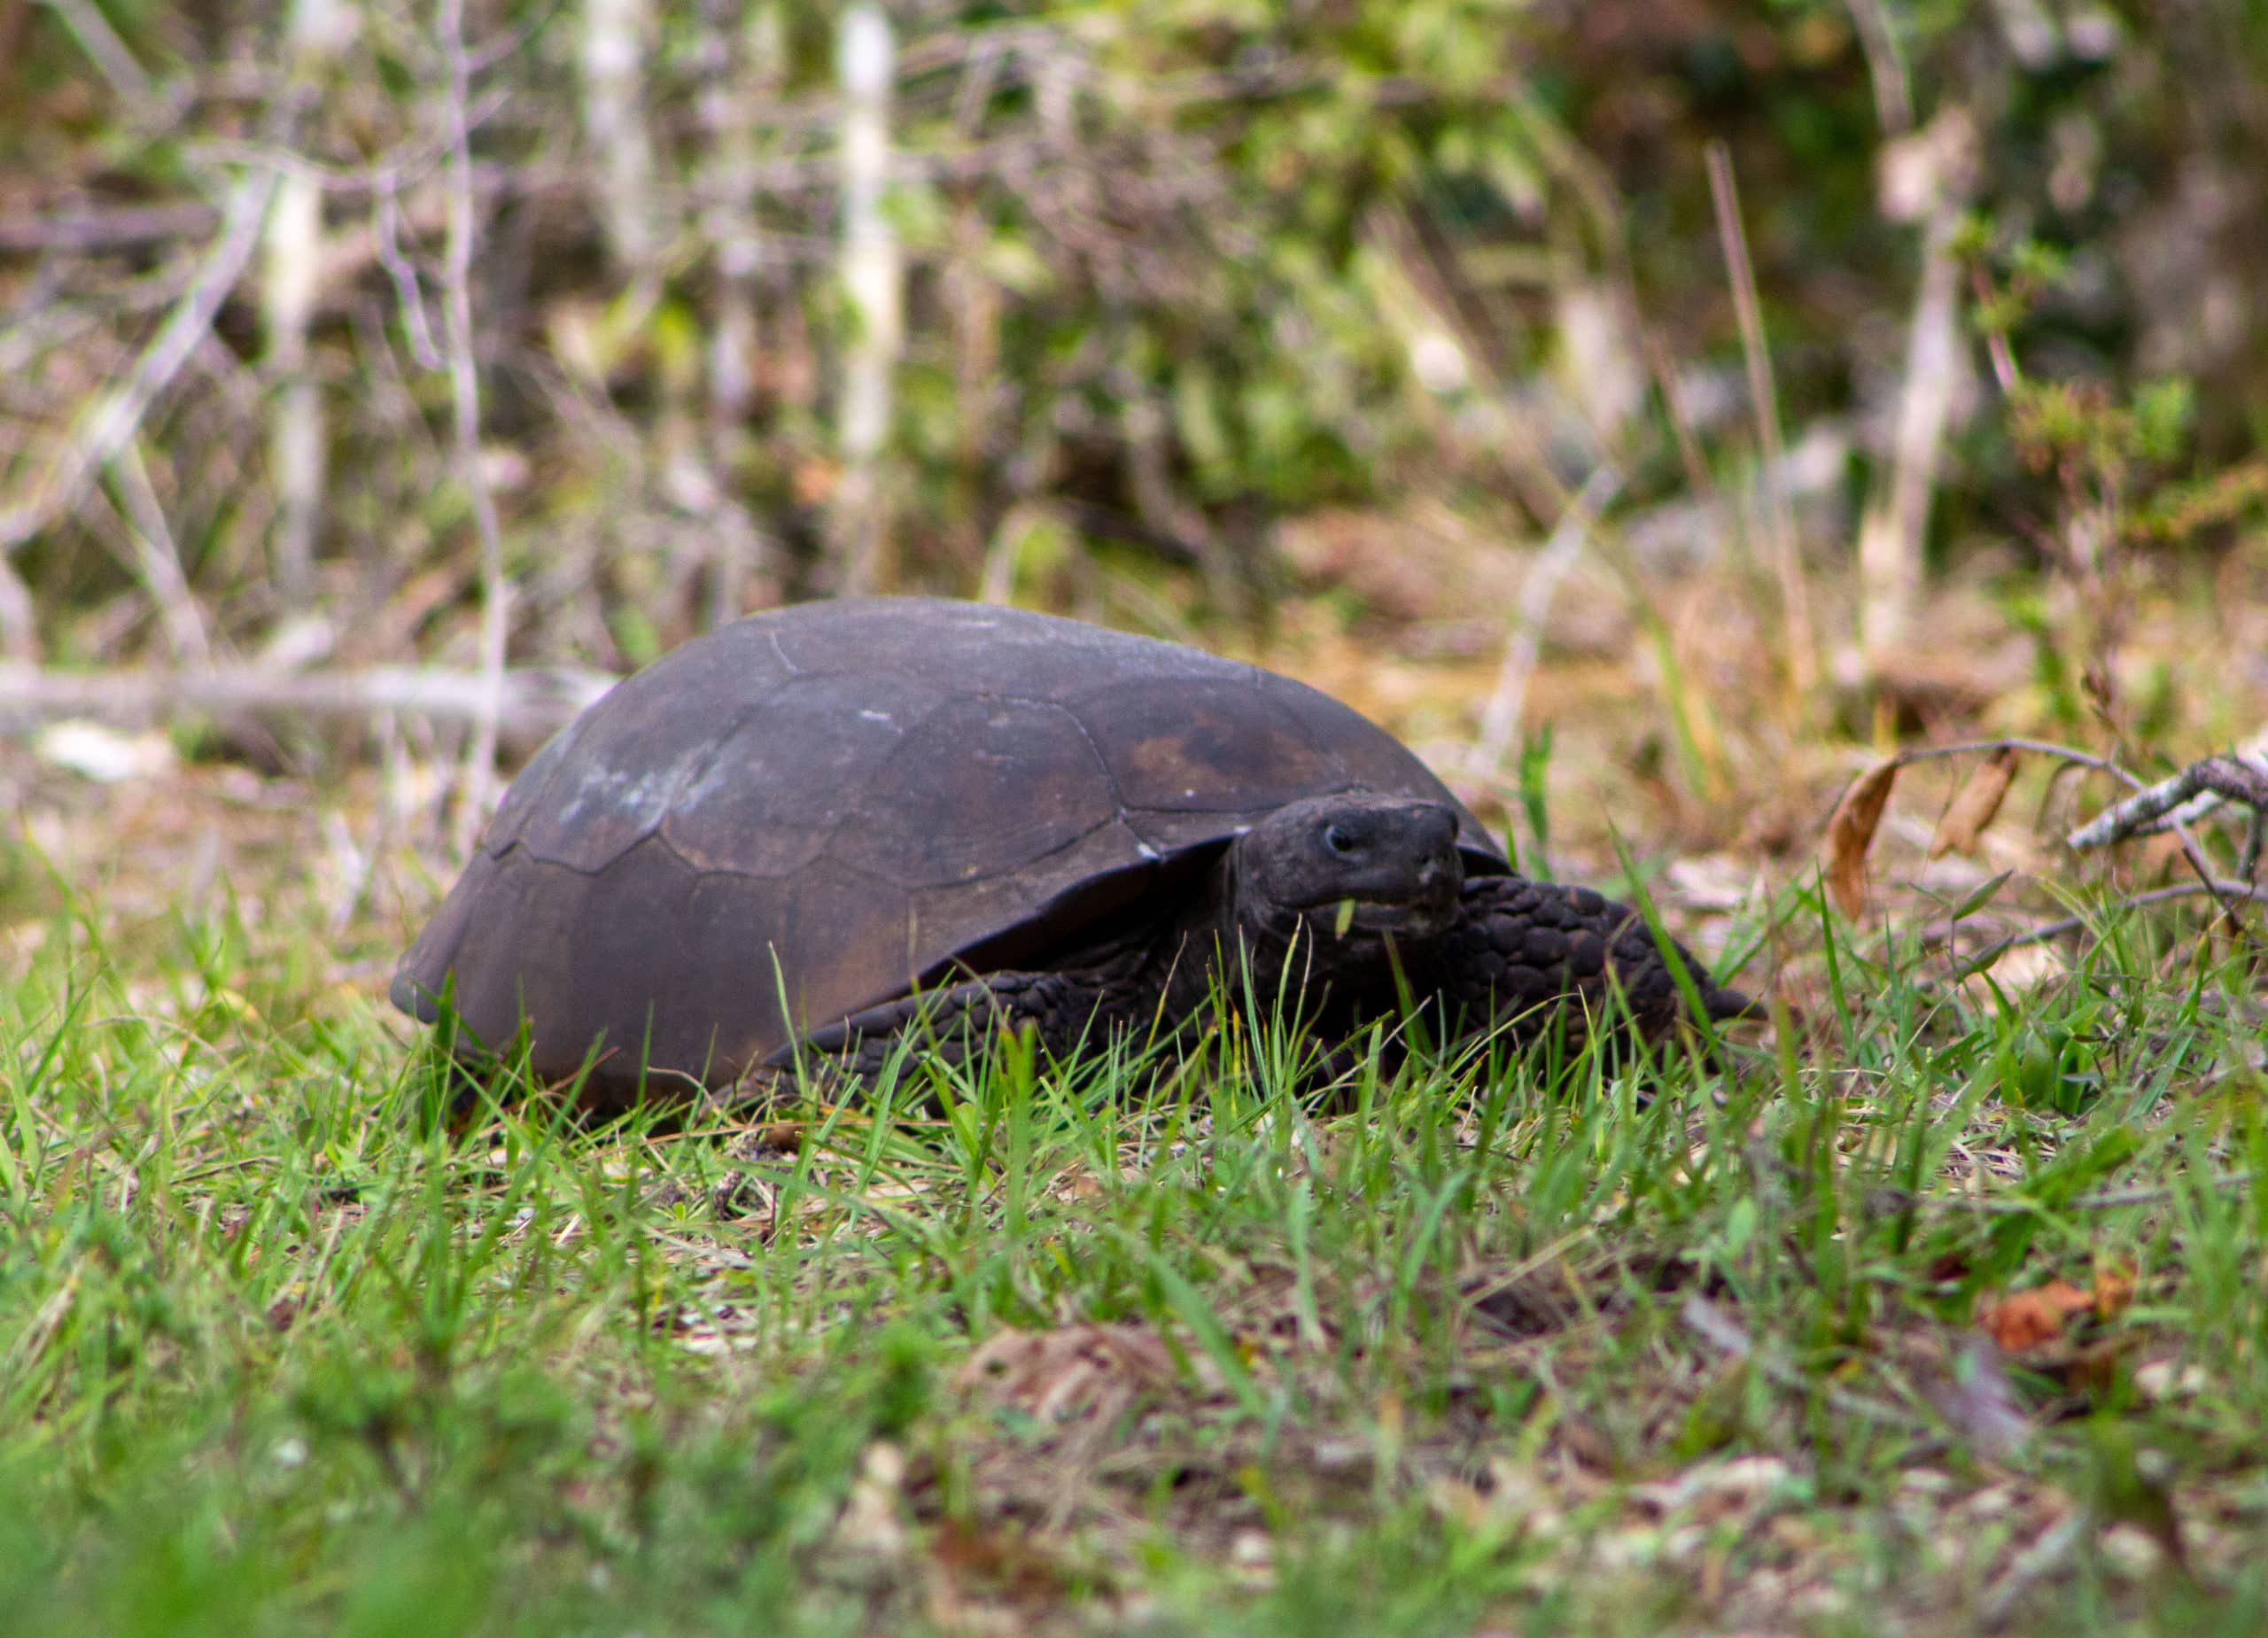 gopher tortoise chewing on grass